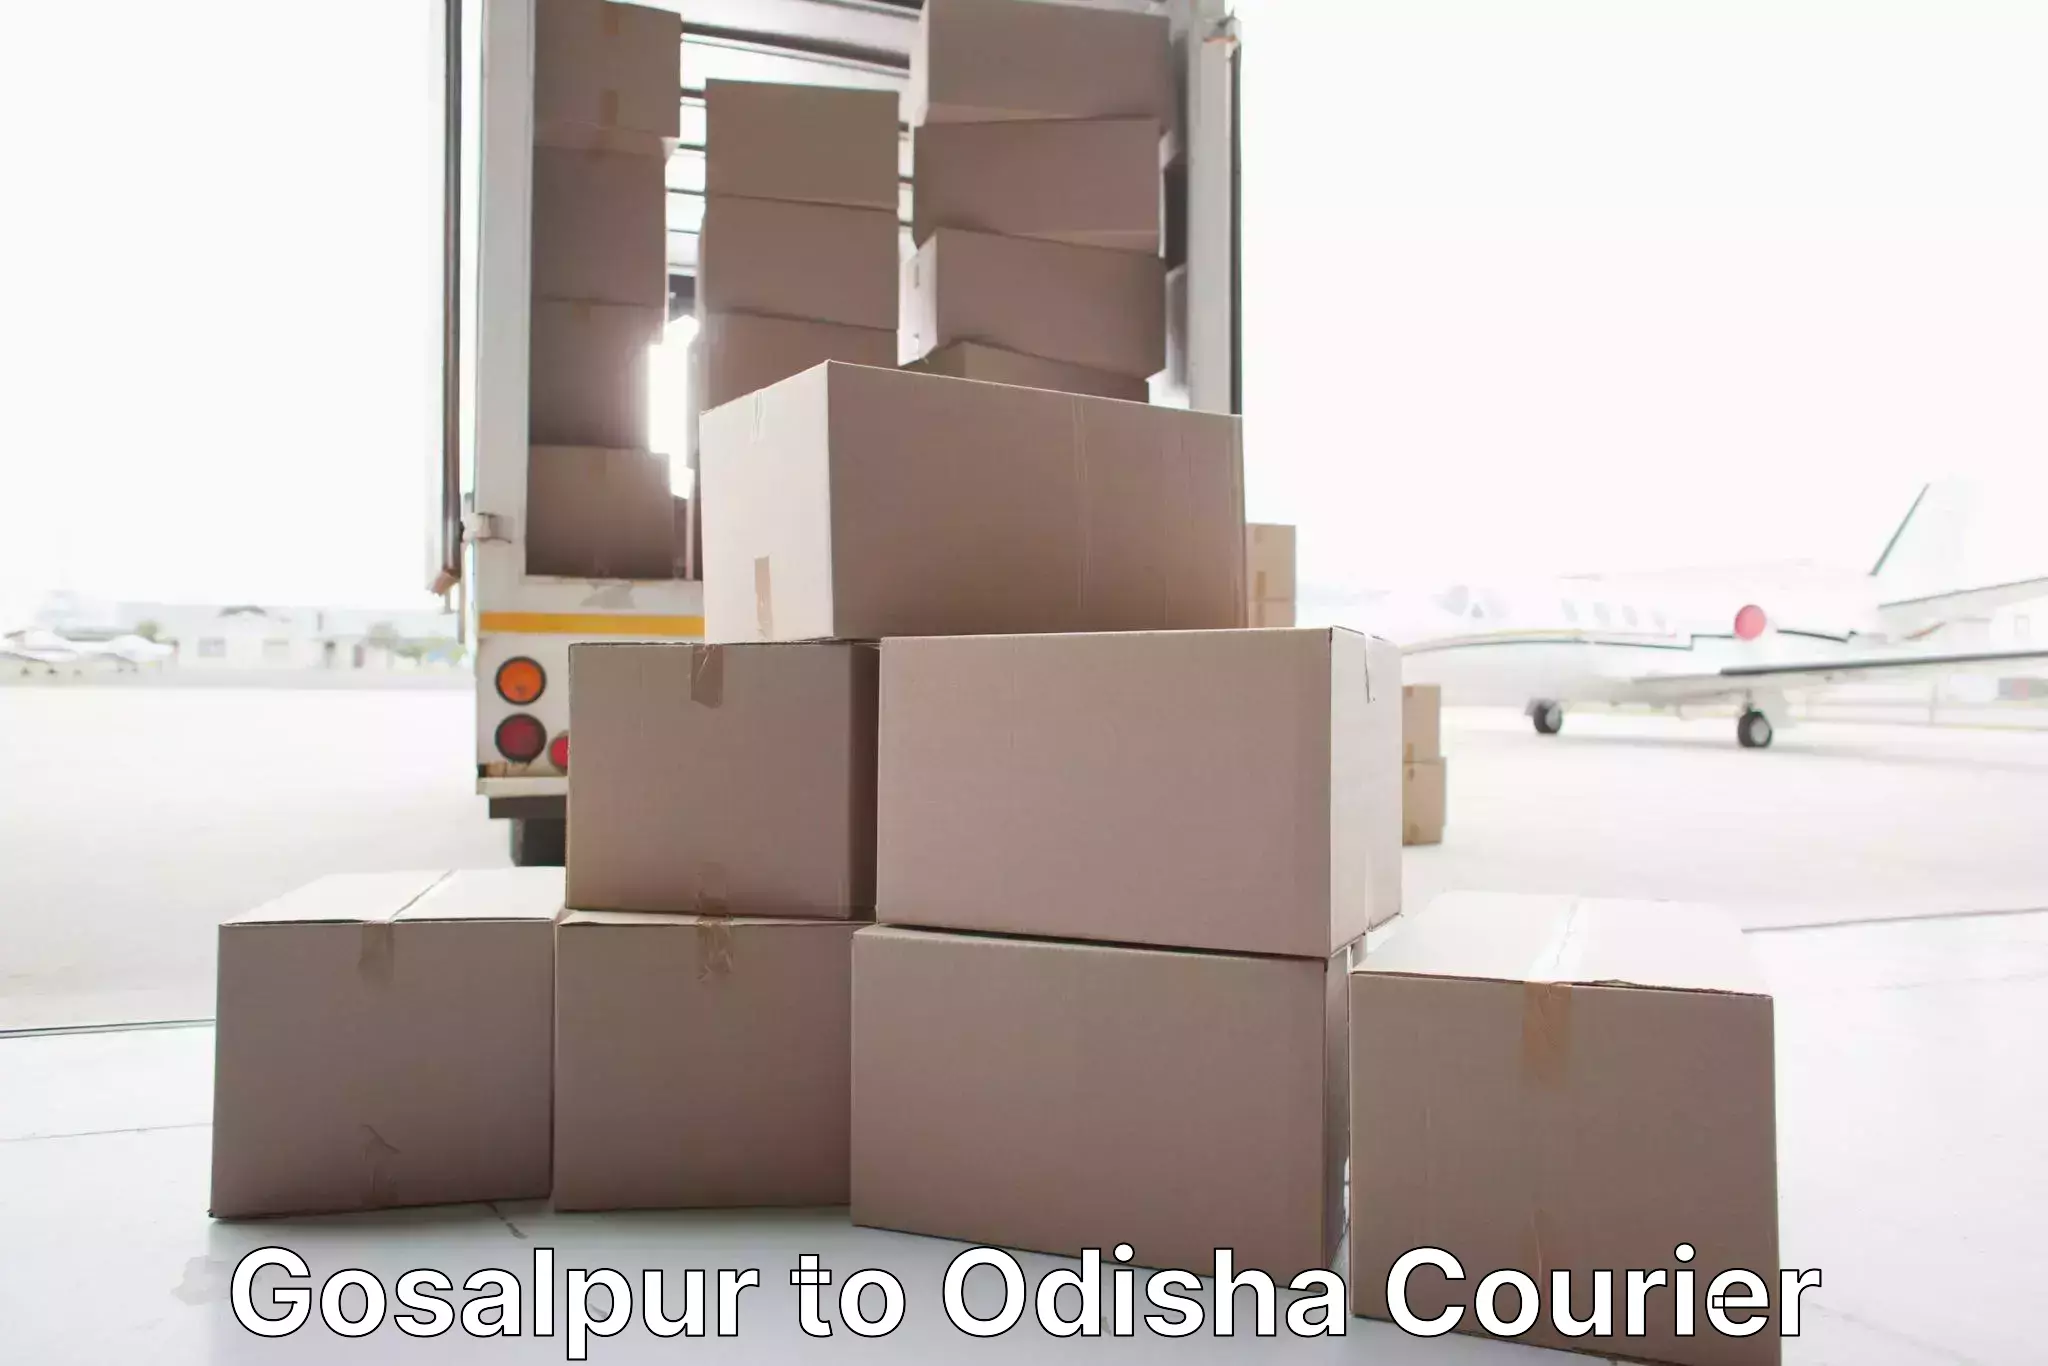 Moving and storage services Gosalpur to Raruan